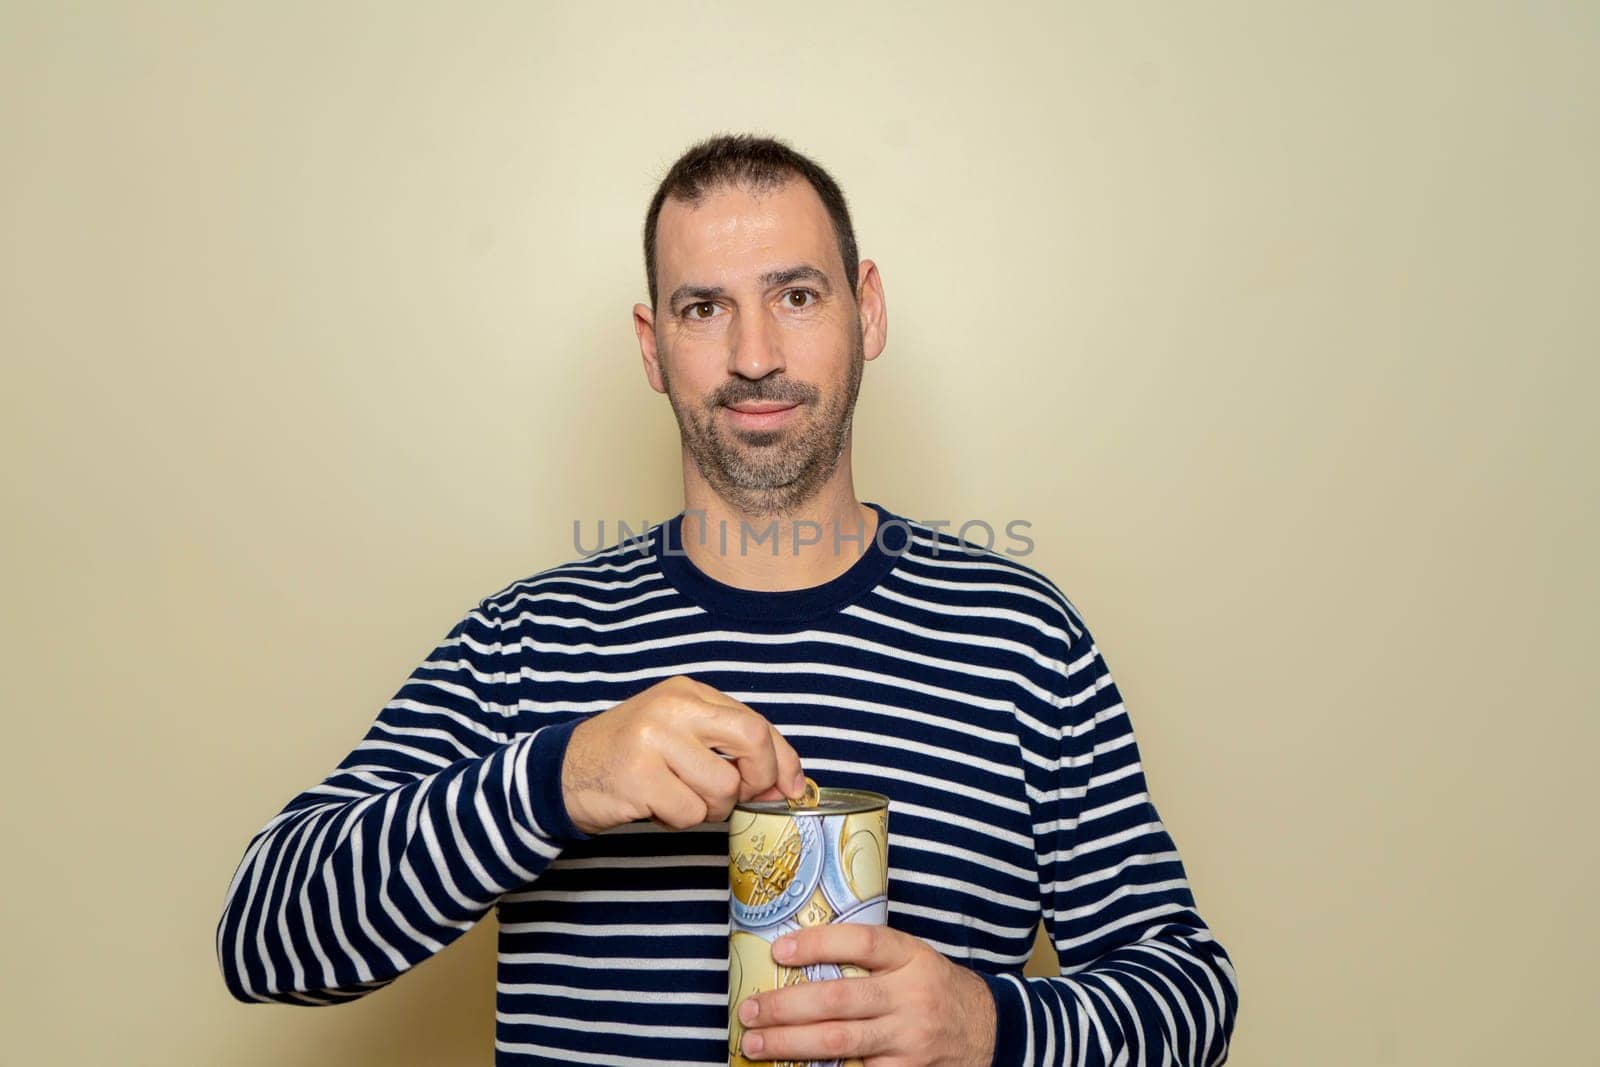 A Hispanic man with a beard wearing a striped sweater putting a euro coin into a metal piggy bank, trying to save so he can travel on vacation. Isolated on beige studio background. by Barriolo82